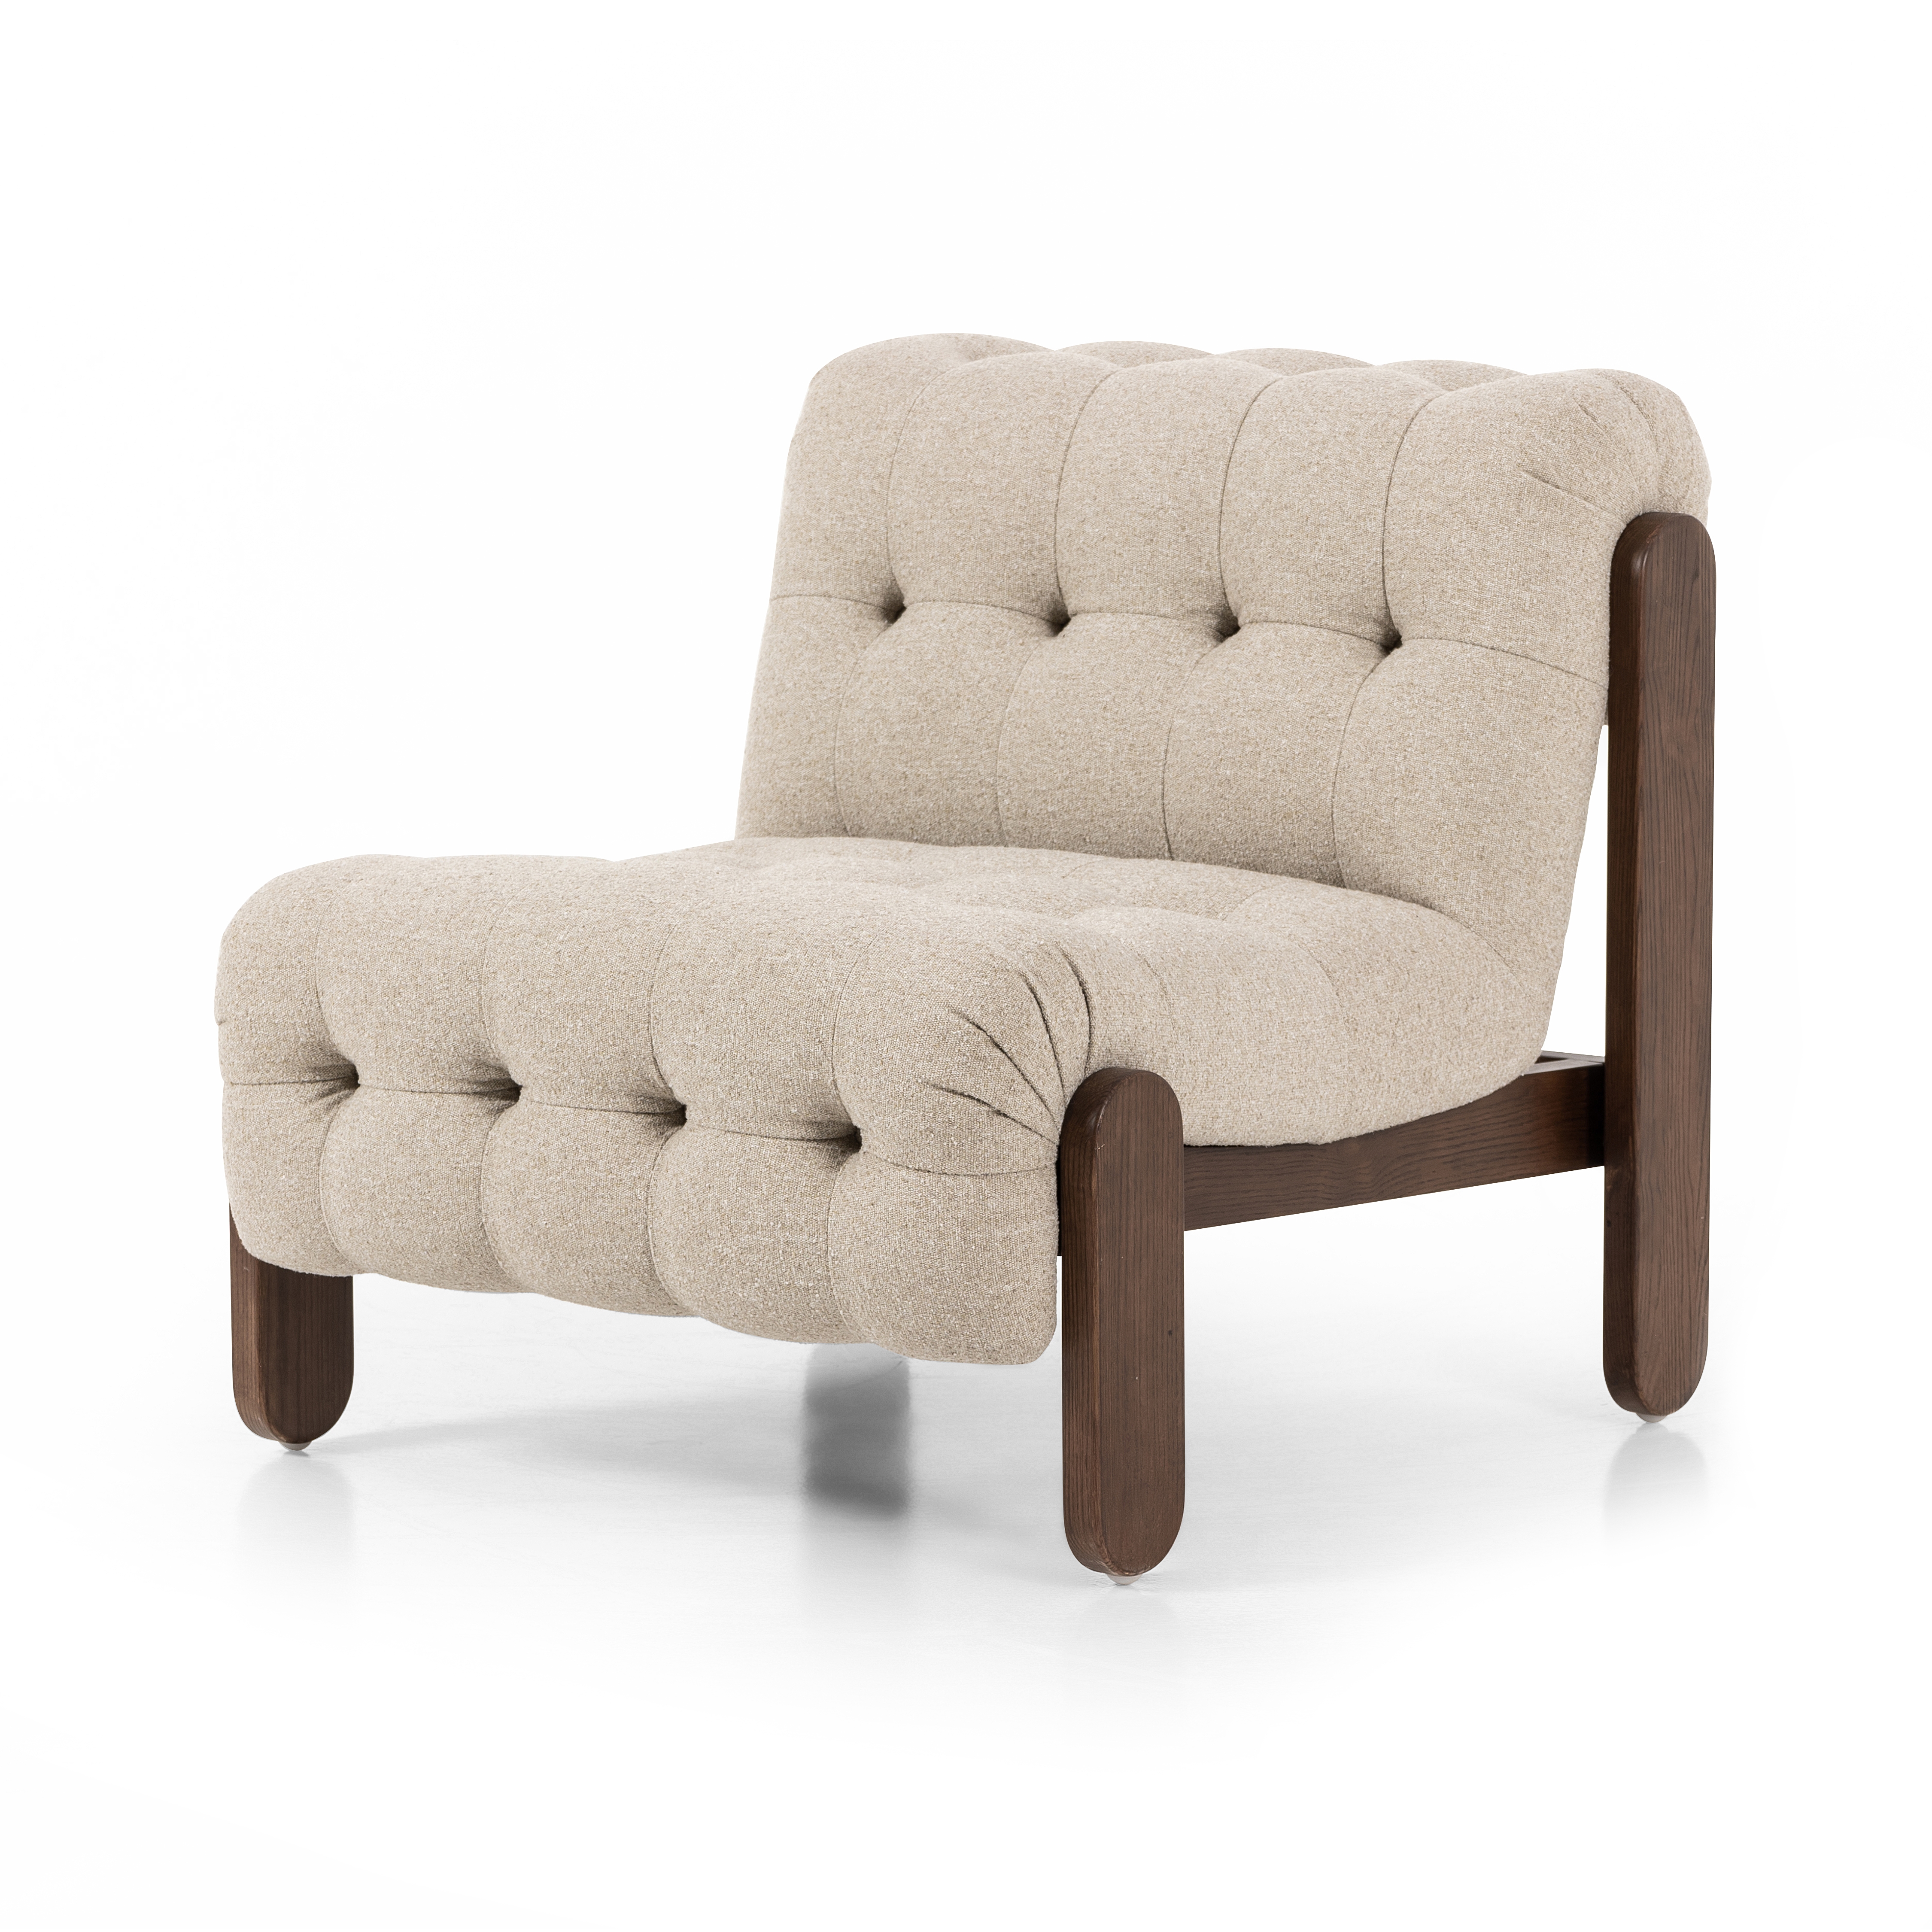 Jeremiah Chair-Weslie Flax - Image 0